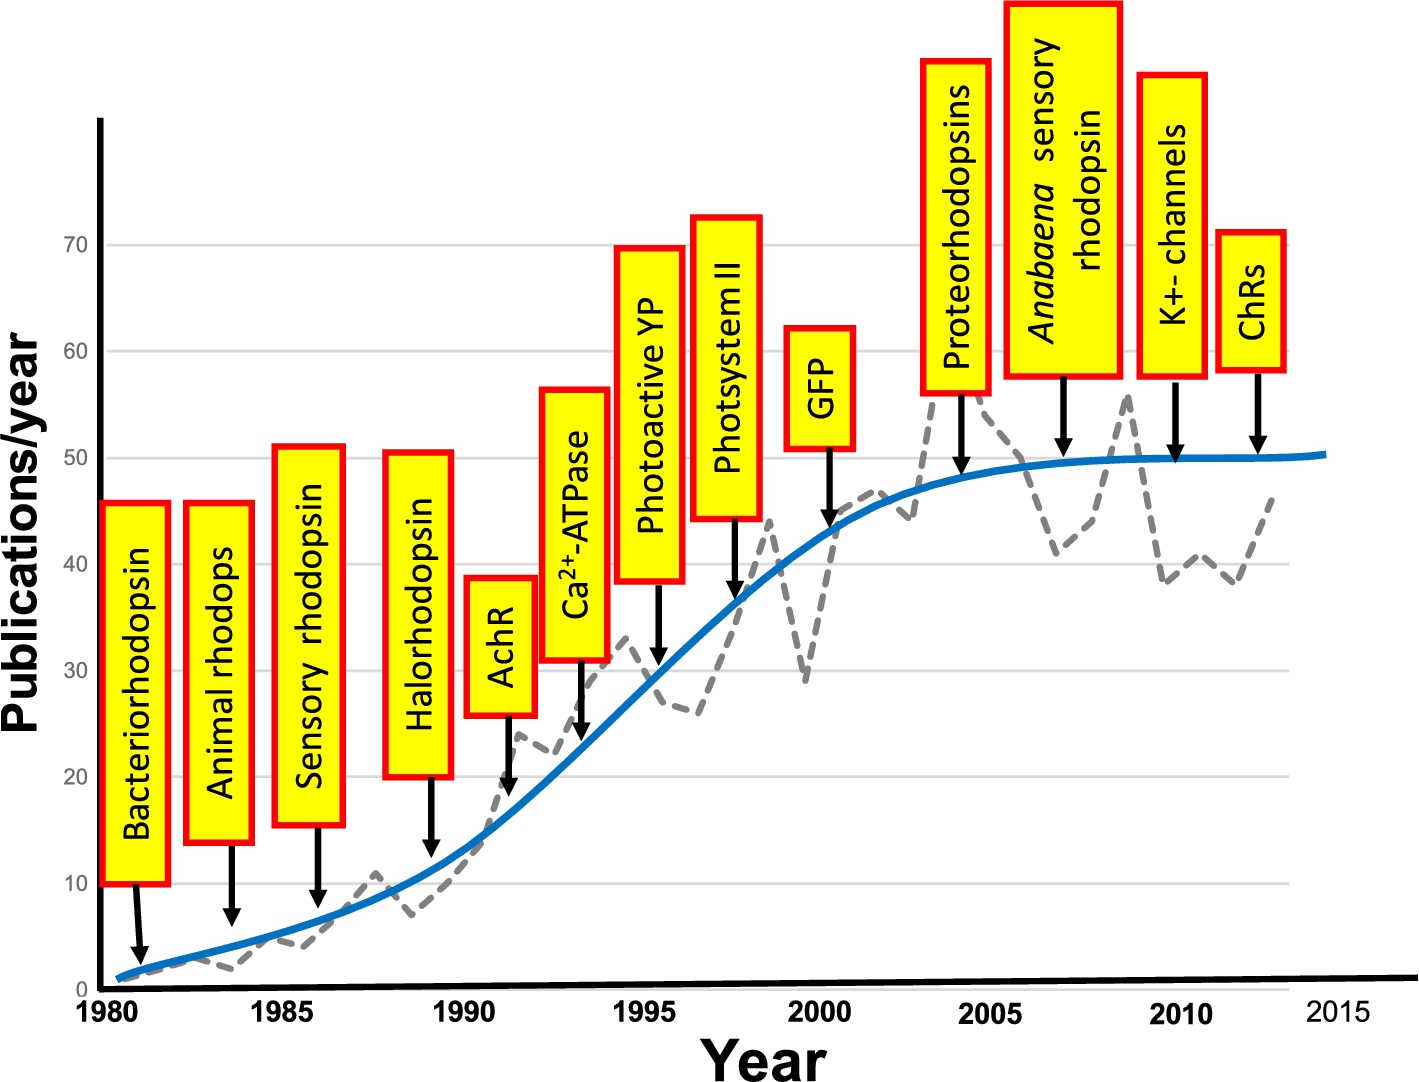 Growth in application of FTIR difference spectroscopy to study membrane proteins and other photoactive proteins or proteins that can be photoactivated. Graph shows the approximate number of publications/year. Yellow boxes indicate the approximate time that FTIR difference spectroscopy was first applied for the particular protein.